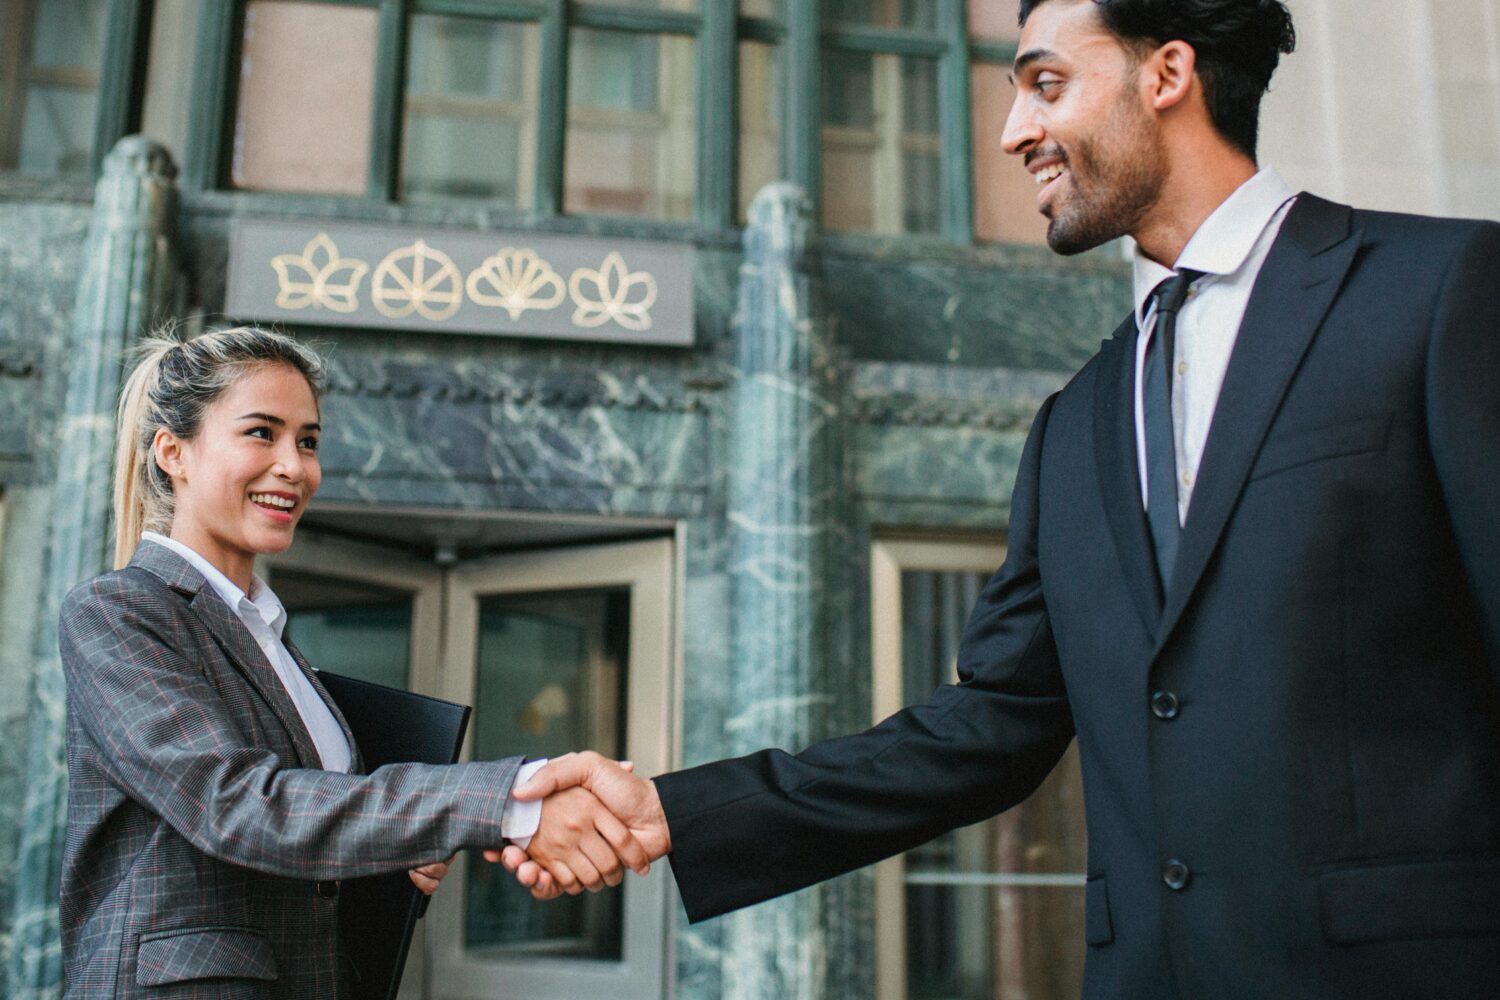 Woman and man in office suit shaking hands